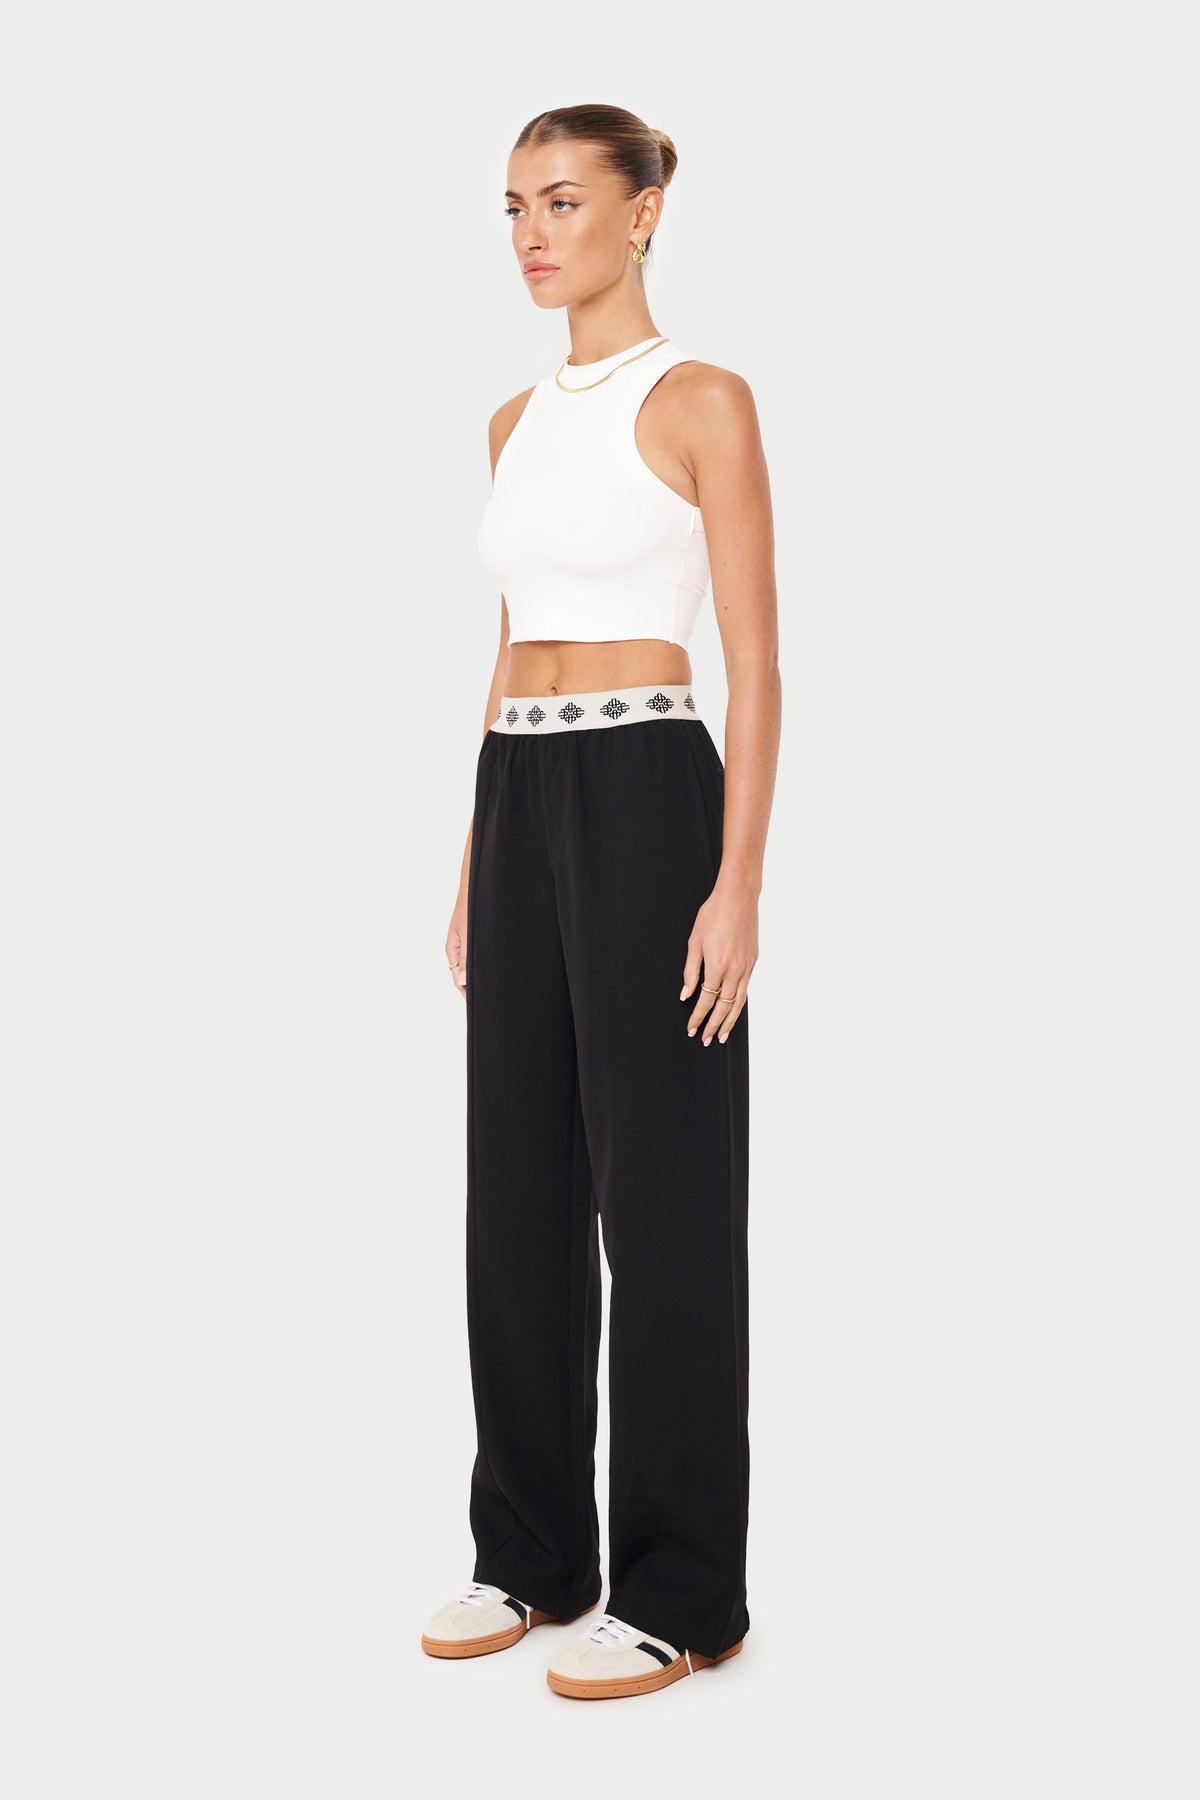 BRANDED WAISTBAND TAILORED PANT - BLACK – The Couture Club